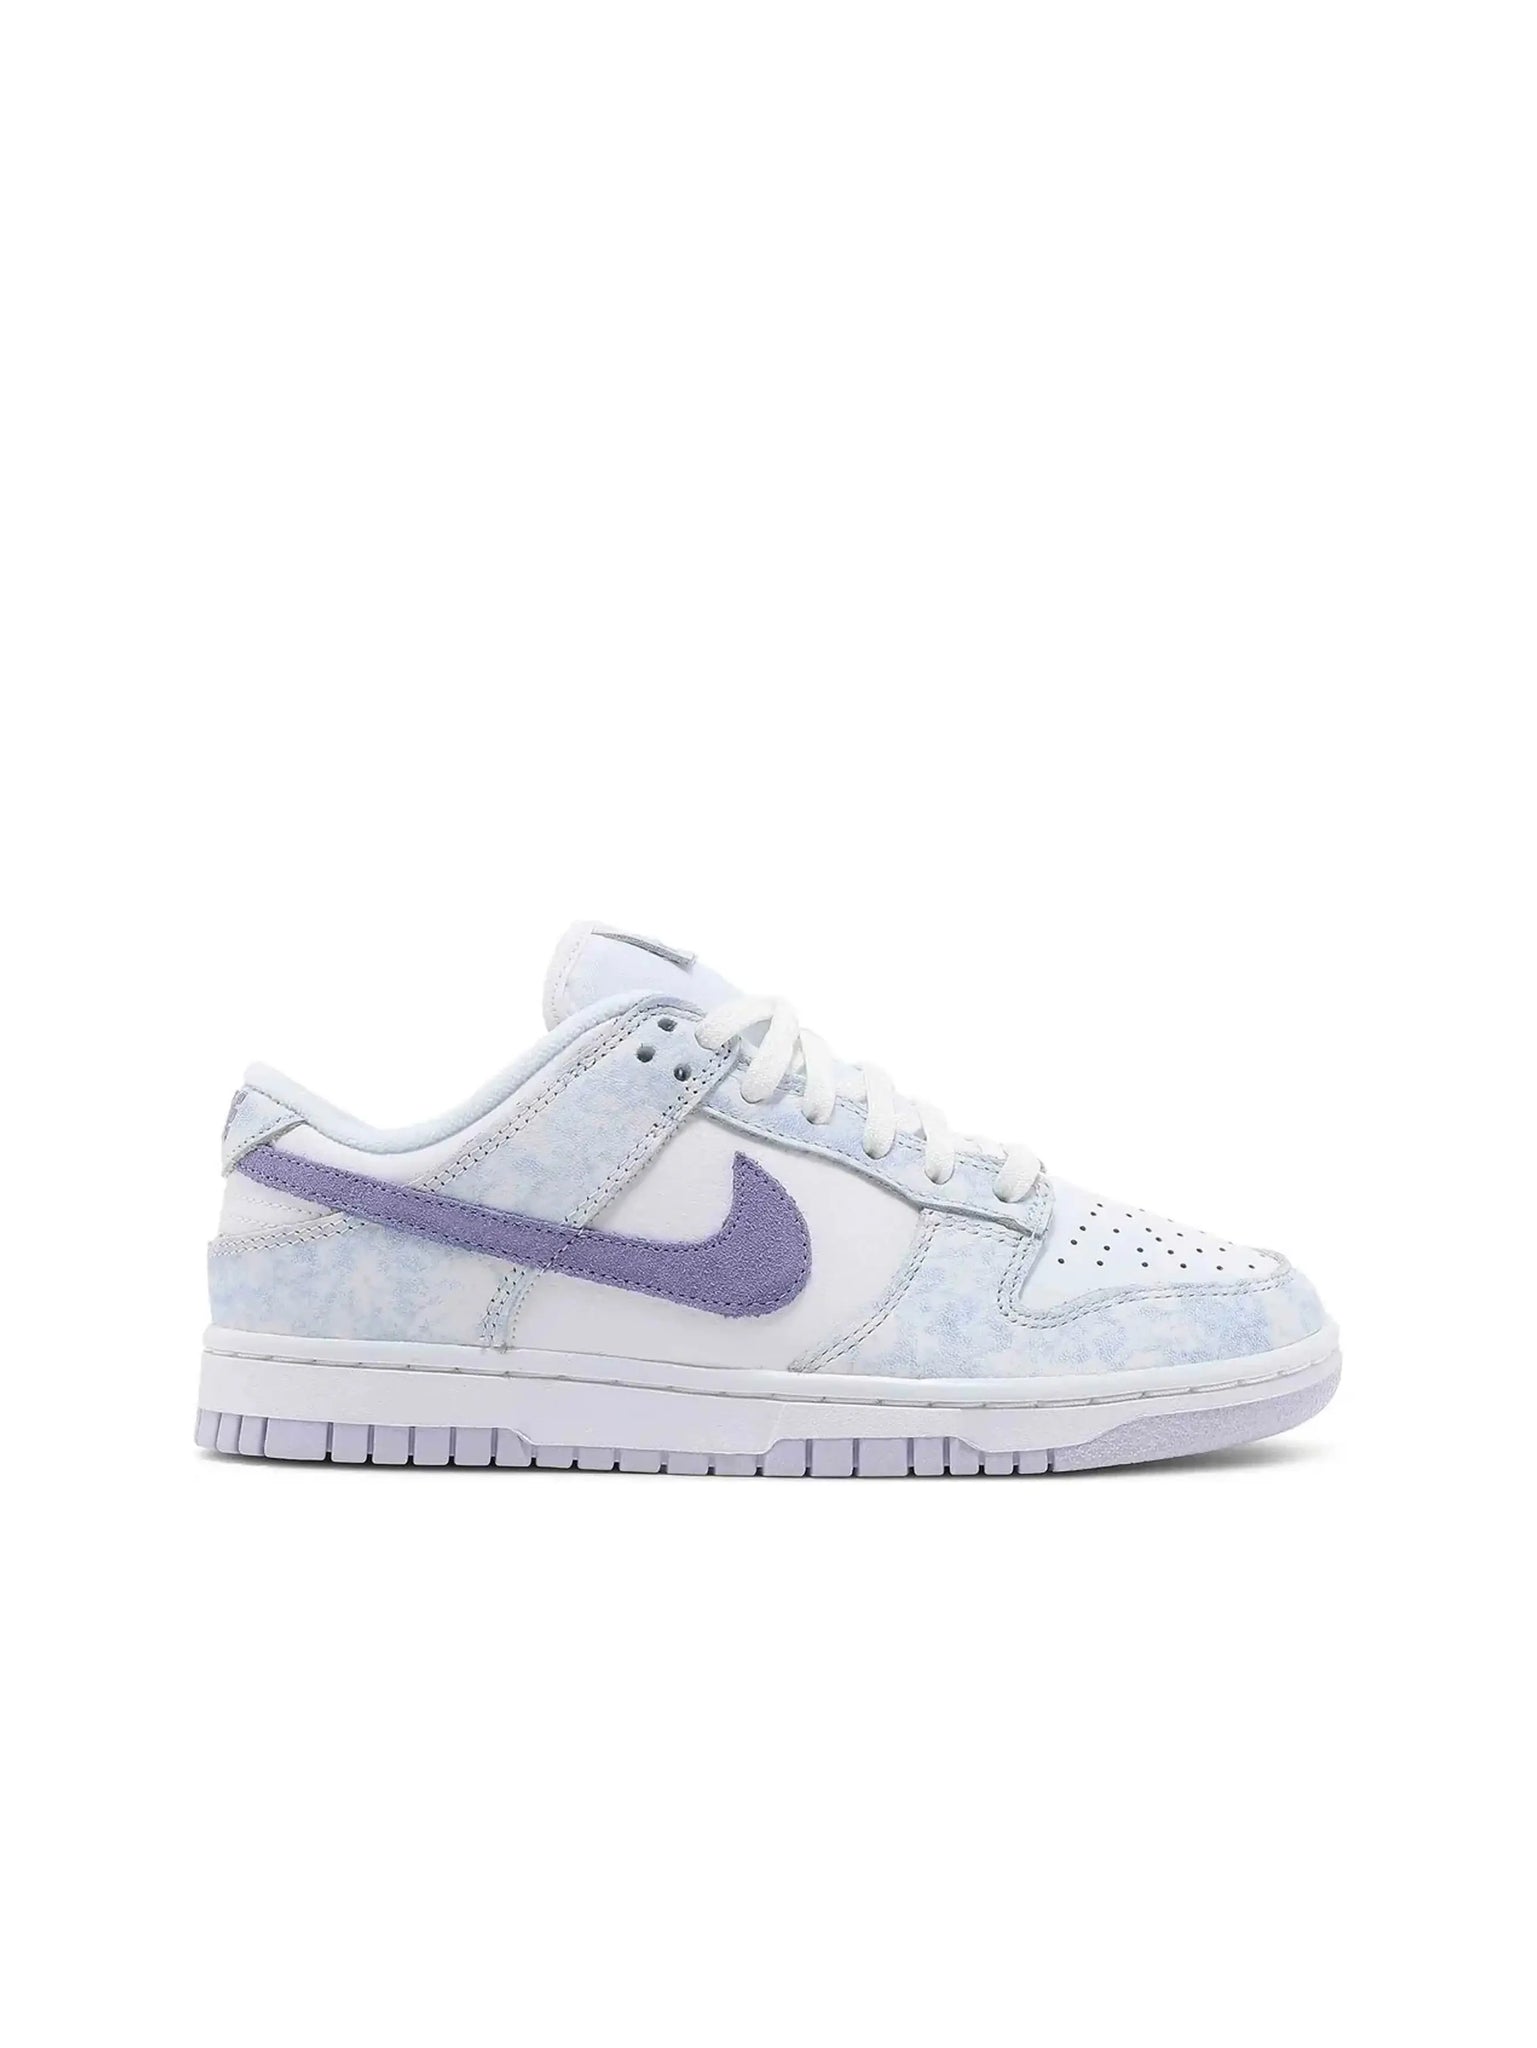 Nike Dunk Low Purple Pulse (W) in Auckland, New Zealand - Shop name